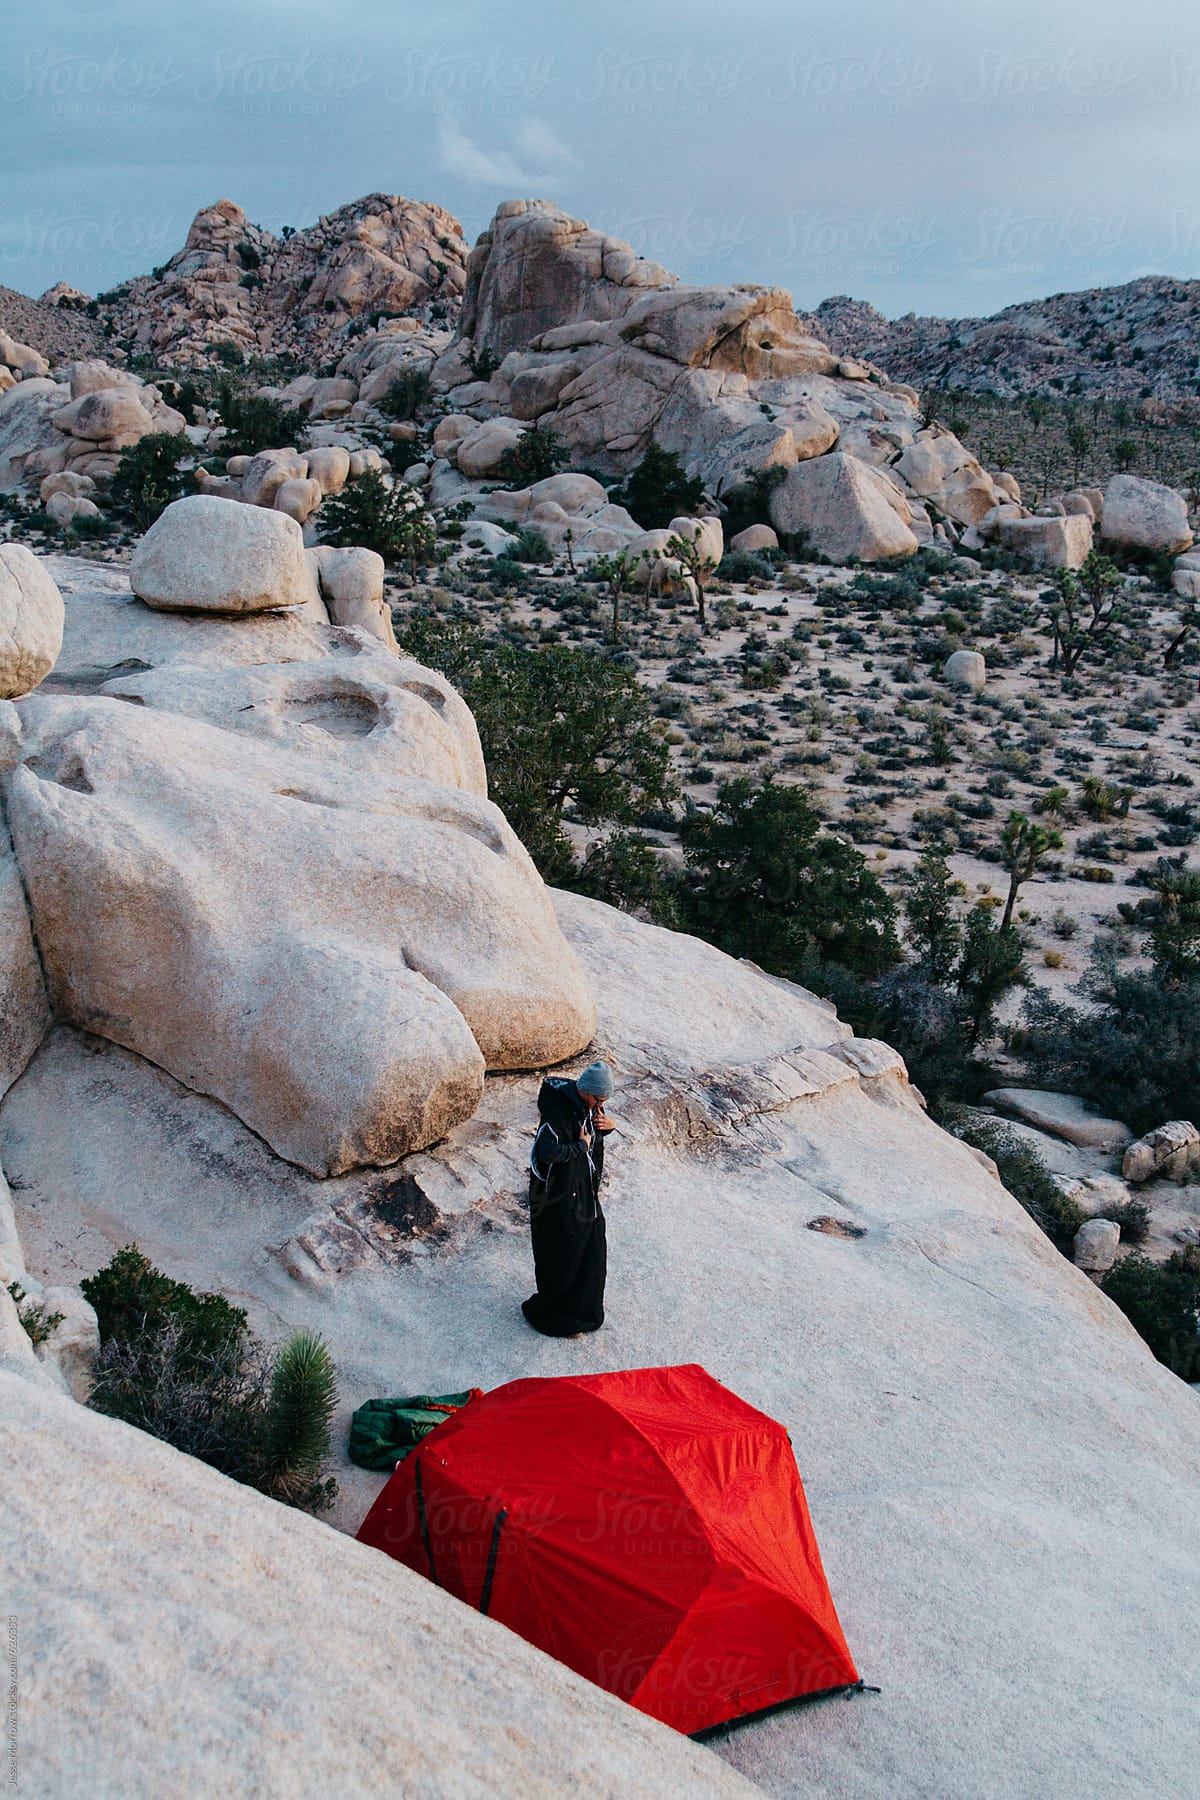 tent camping in joshua tree national park on large rocks and boulders